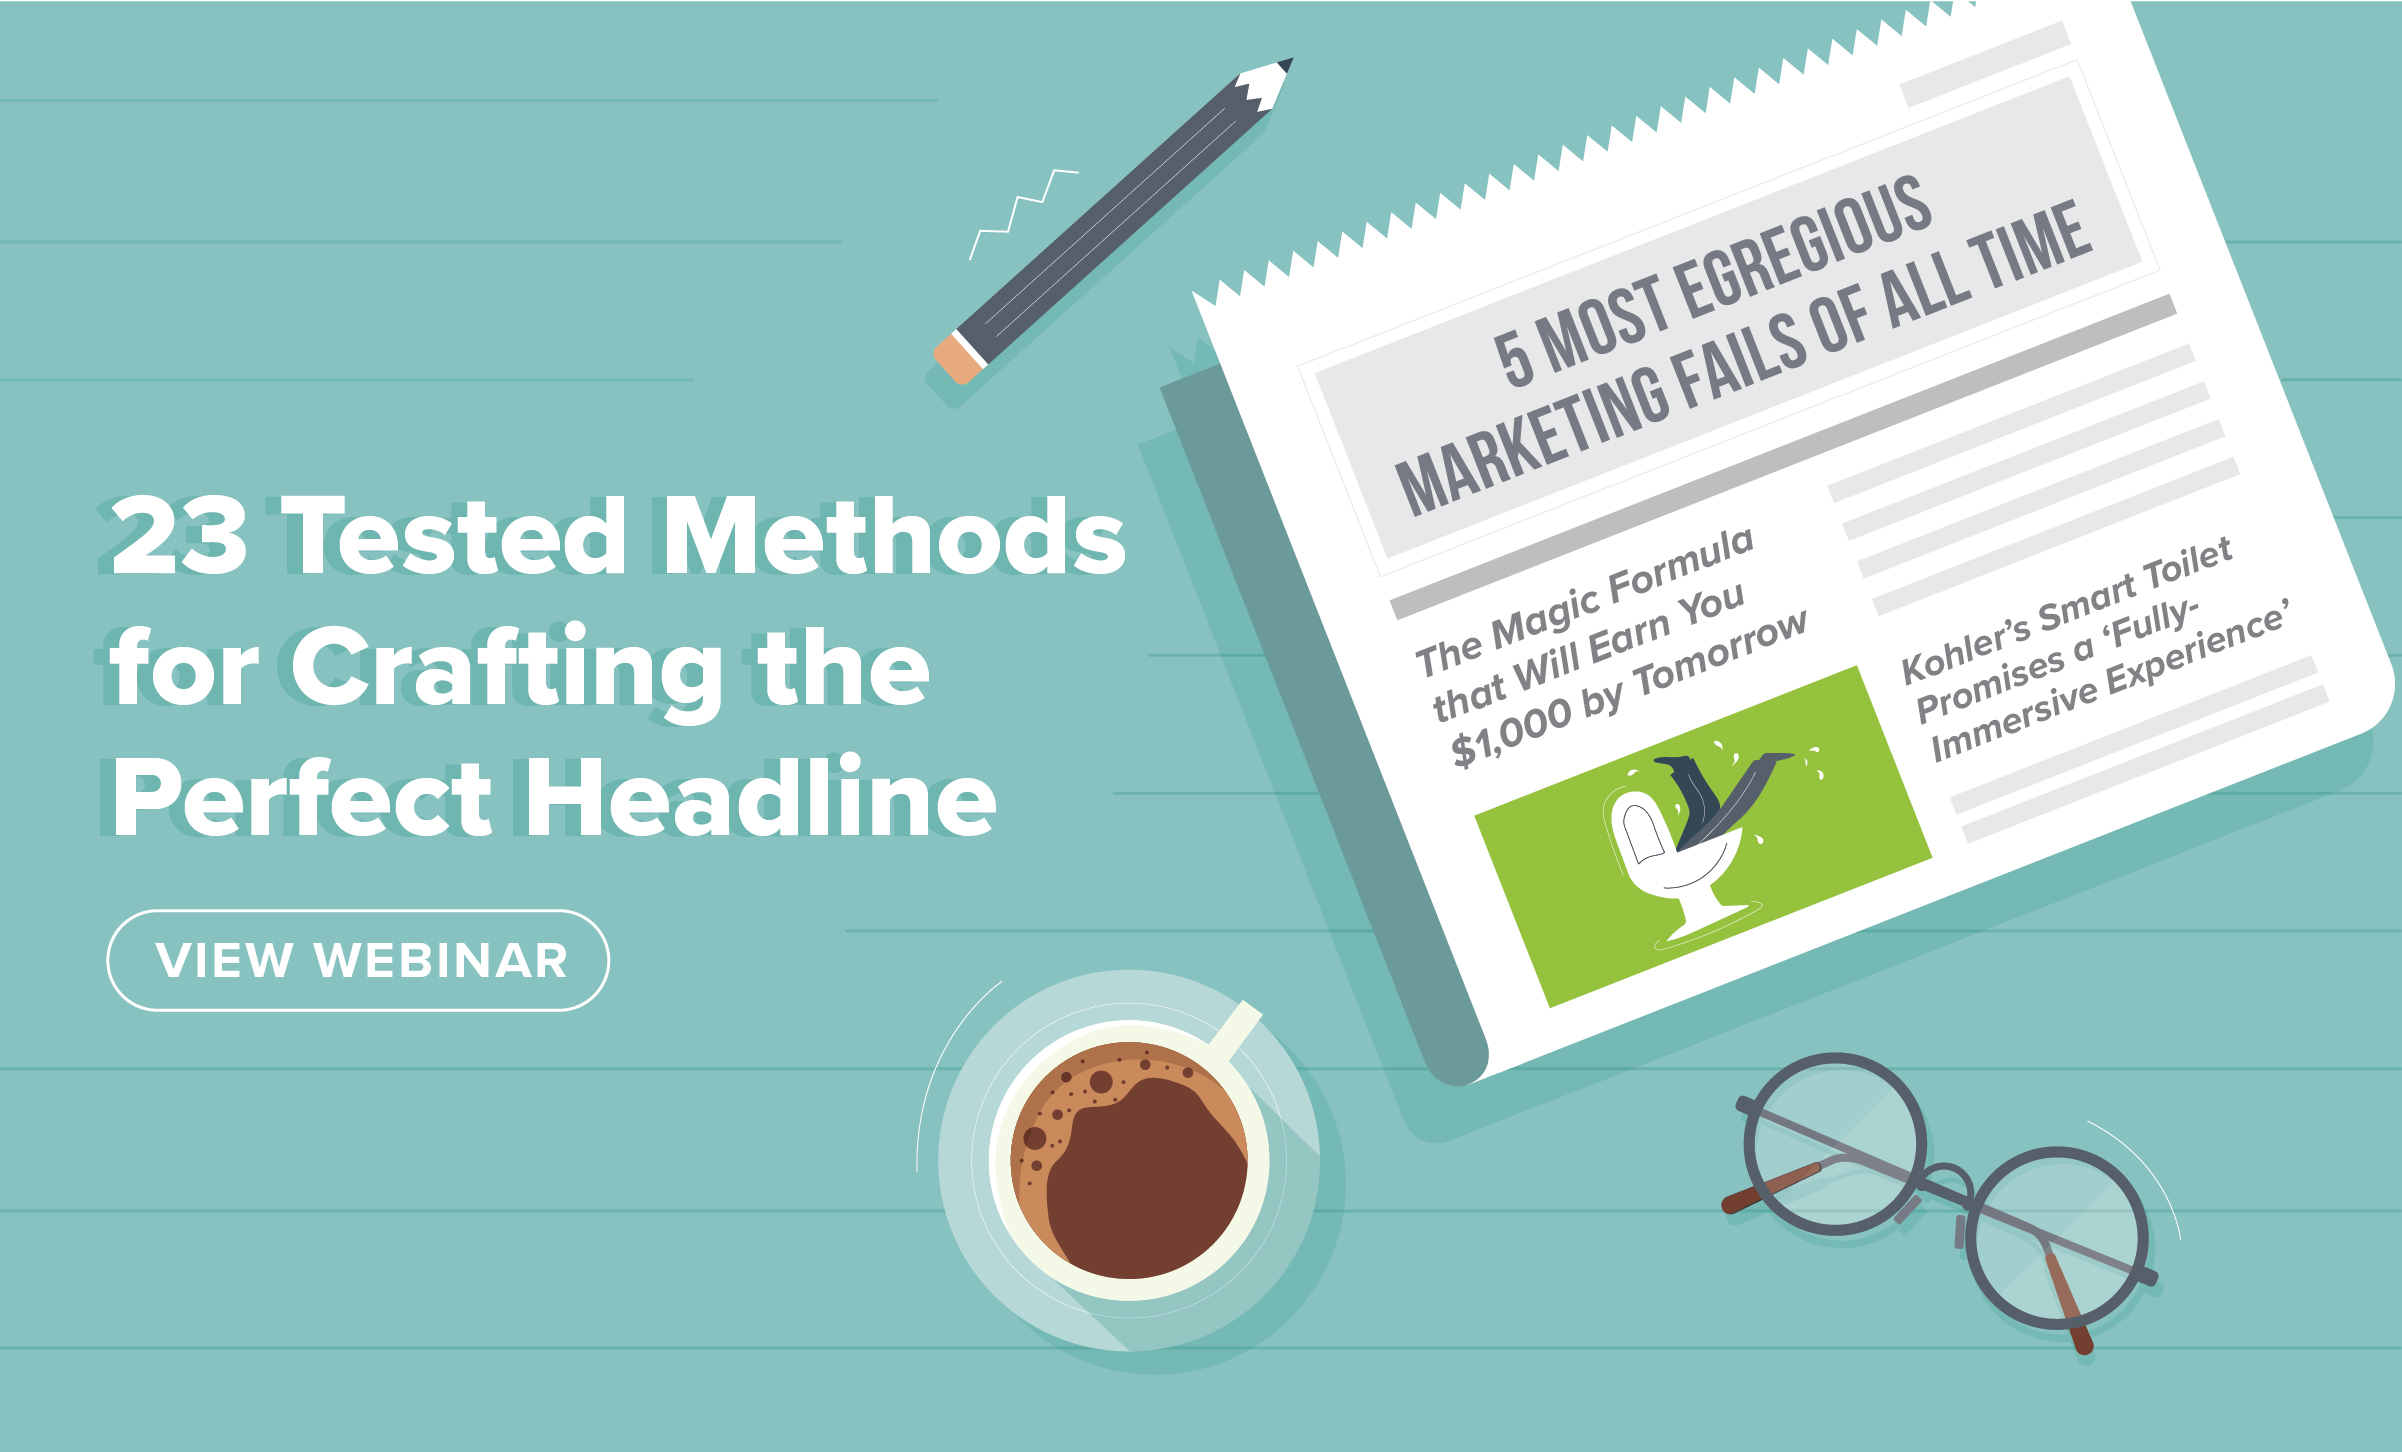 23 Tested Methods for Crafting the Perfect Headline